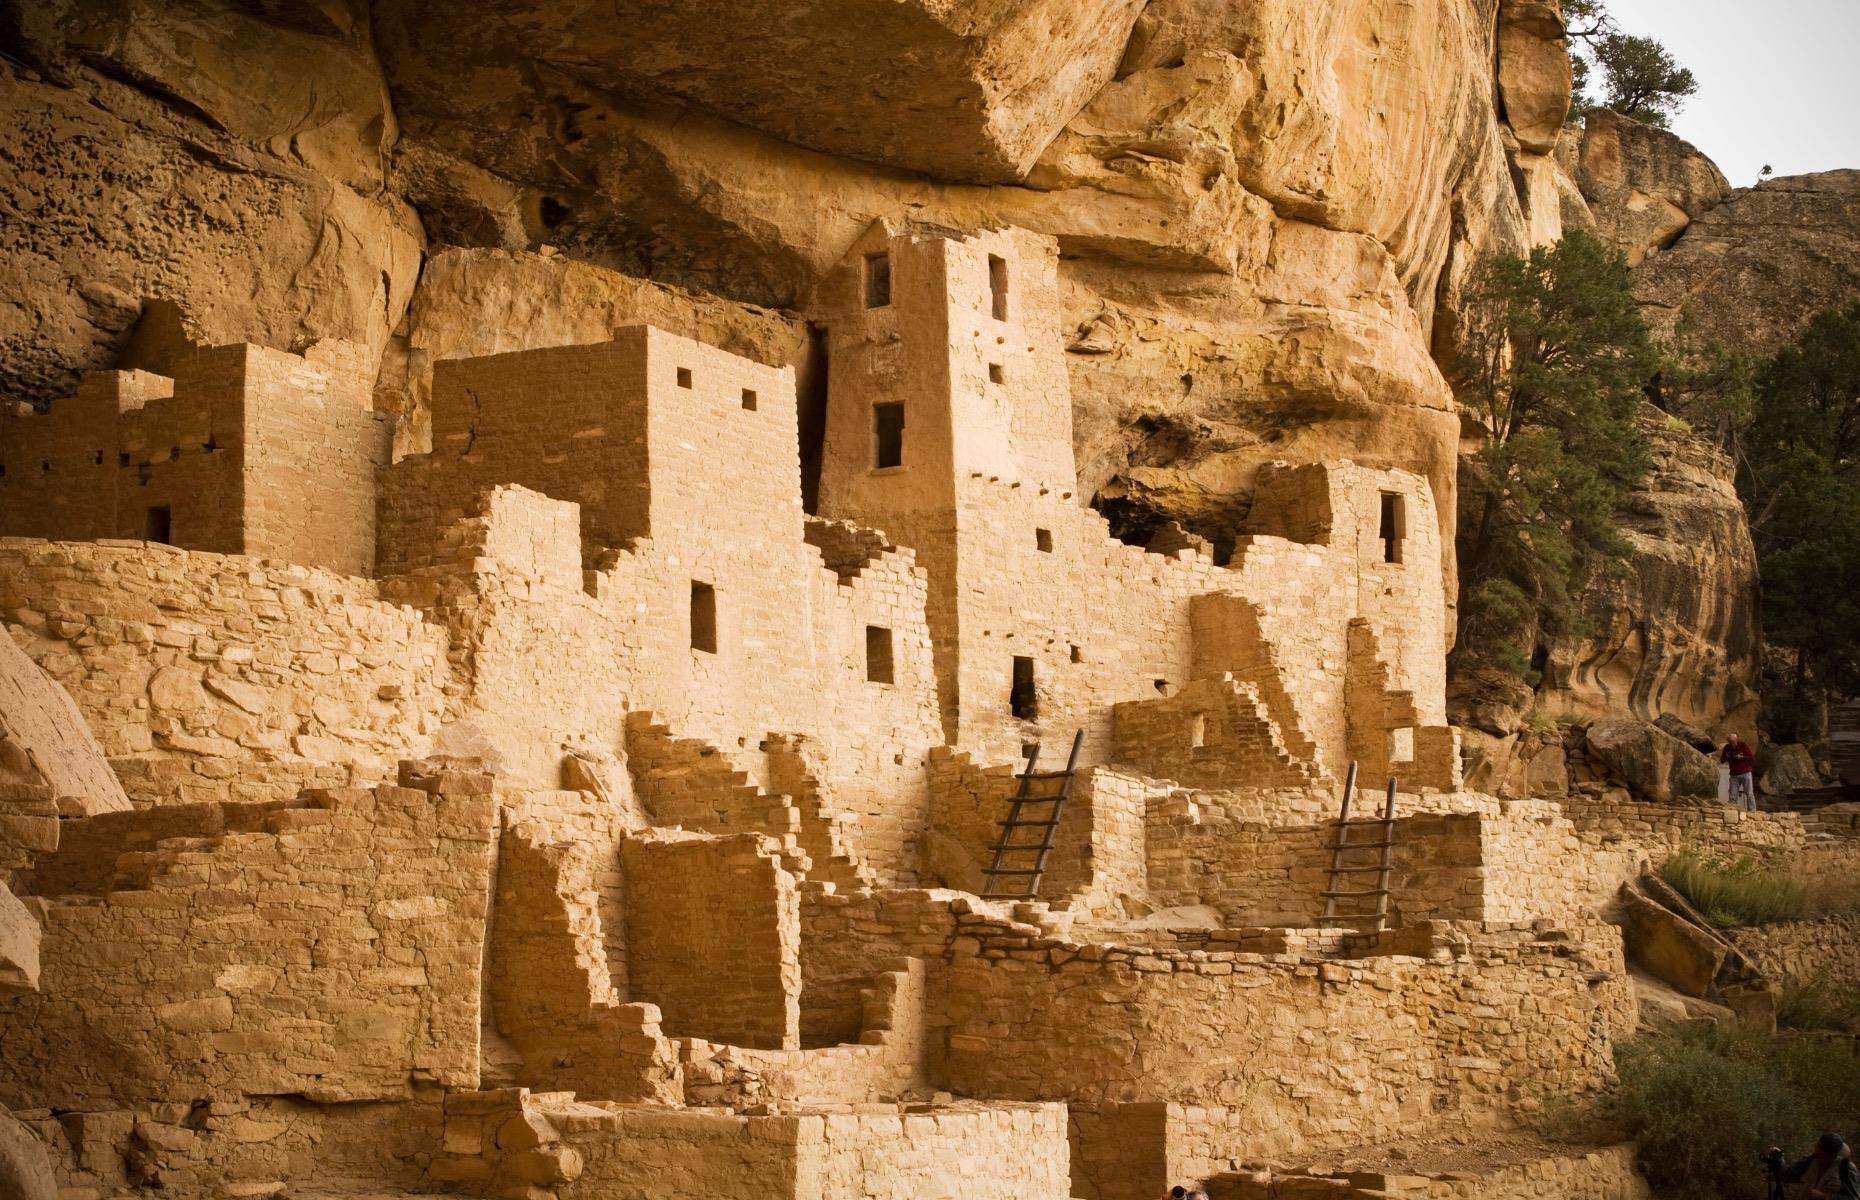 <p>A few hundred years later, they decided to abandon their homes on the cliff top and live beneath in dwellings they built within recesses and alcoves in the cliff. They constructed houses, ceremonial rooms known as 'kivas' and even entire villages out of stone. Archaeologists refer to this time as Mesa Verde’s Classic Period when their architectural skills flourished and designs became more ambitious. It's the homes they created at this time that make Mesa Verde special today.</p>  <p><a href="http://bit.ly/3roL4wv"><strong>Love this? Follow our Facebook page for more history features and travel inspiration</strong></a></p>